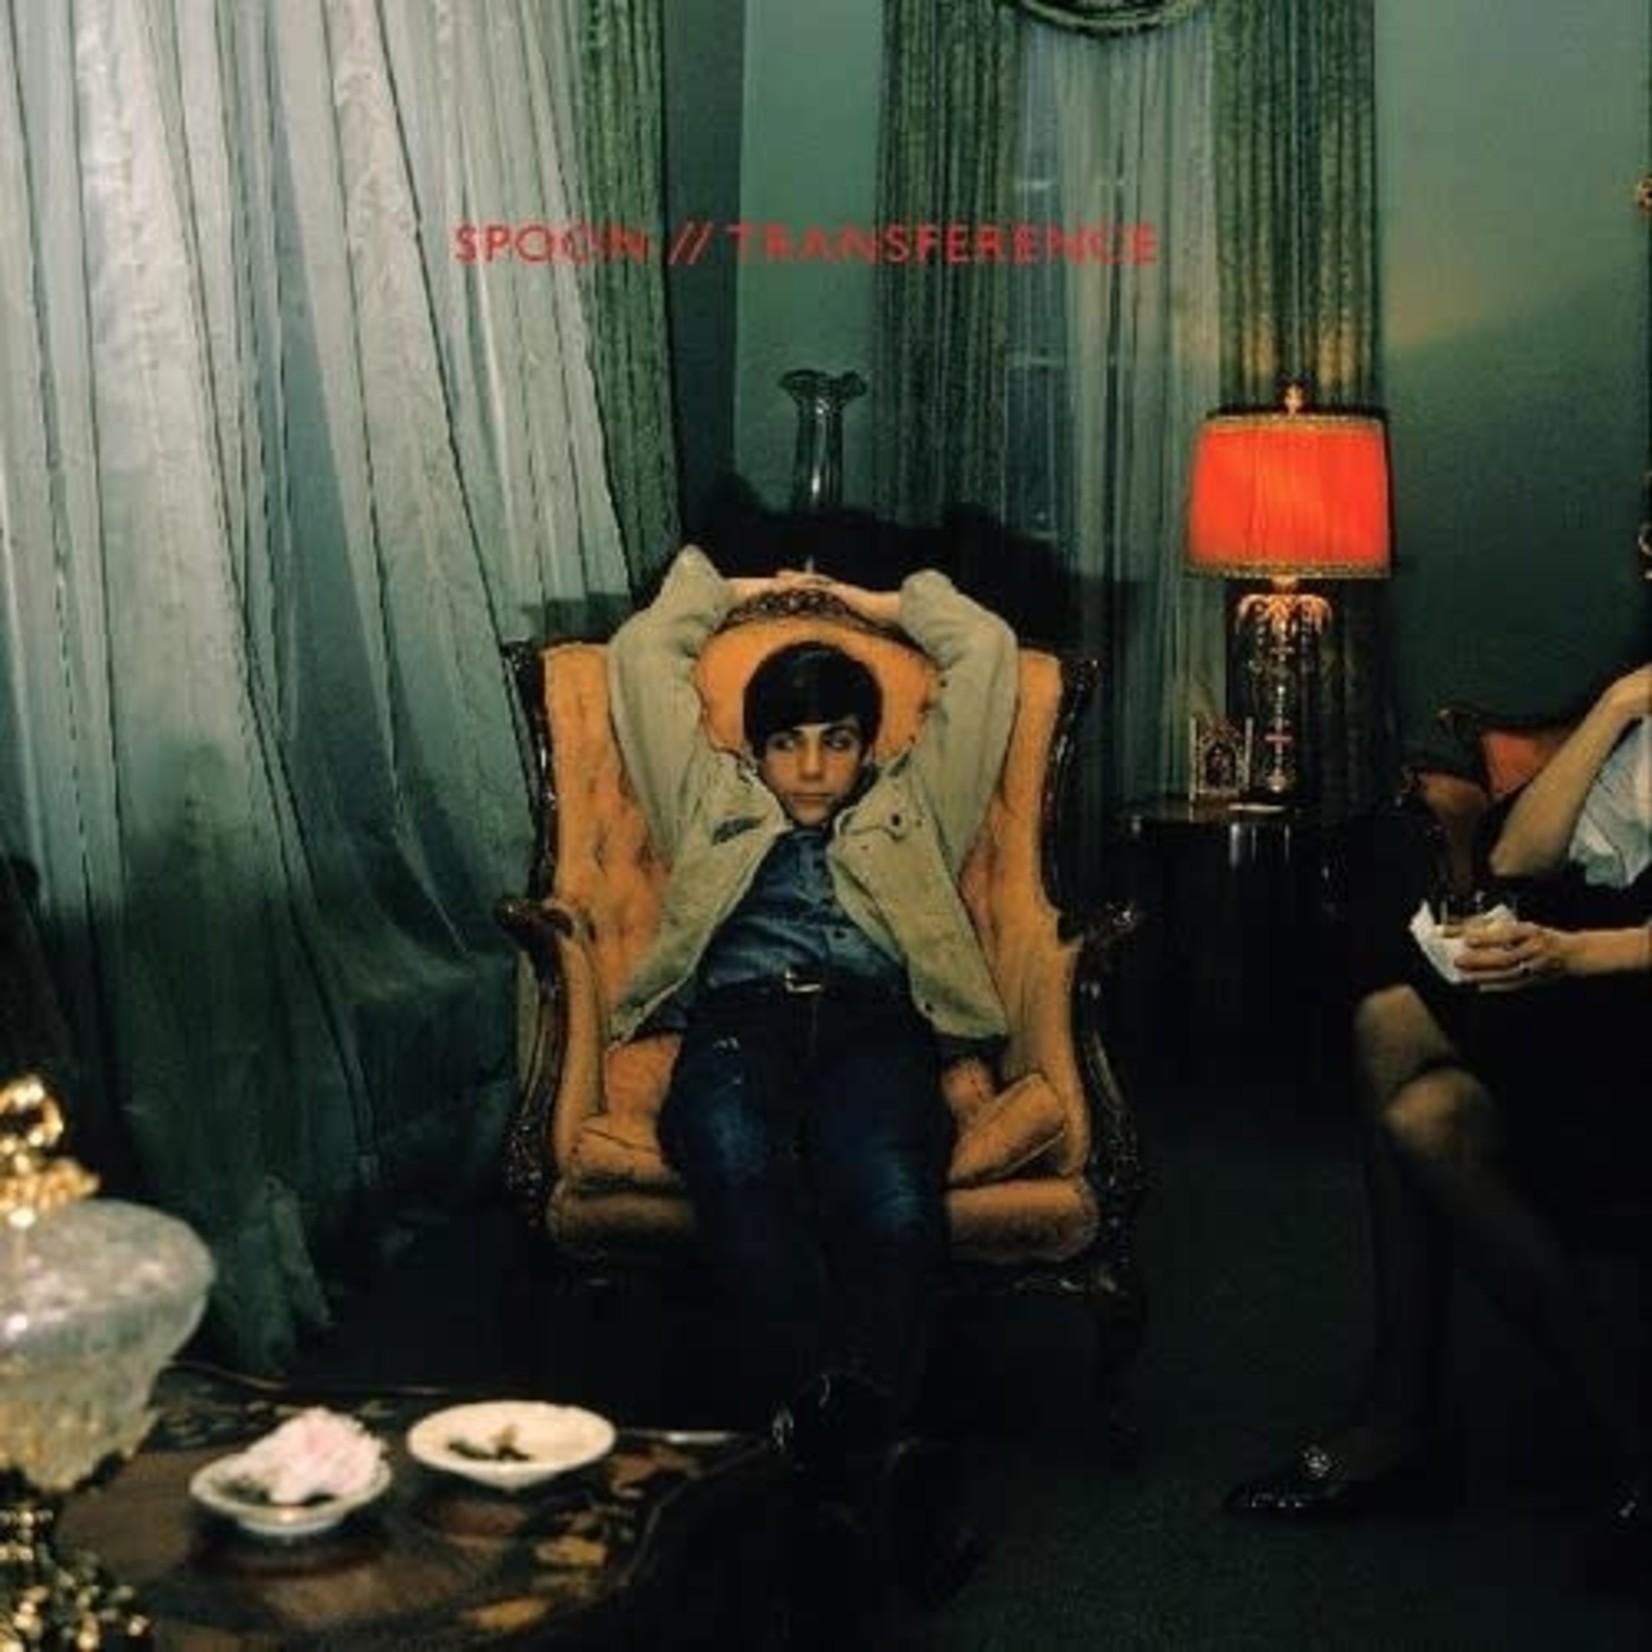 Spoon - Transference [CD]